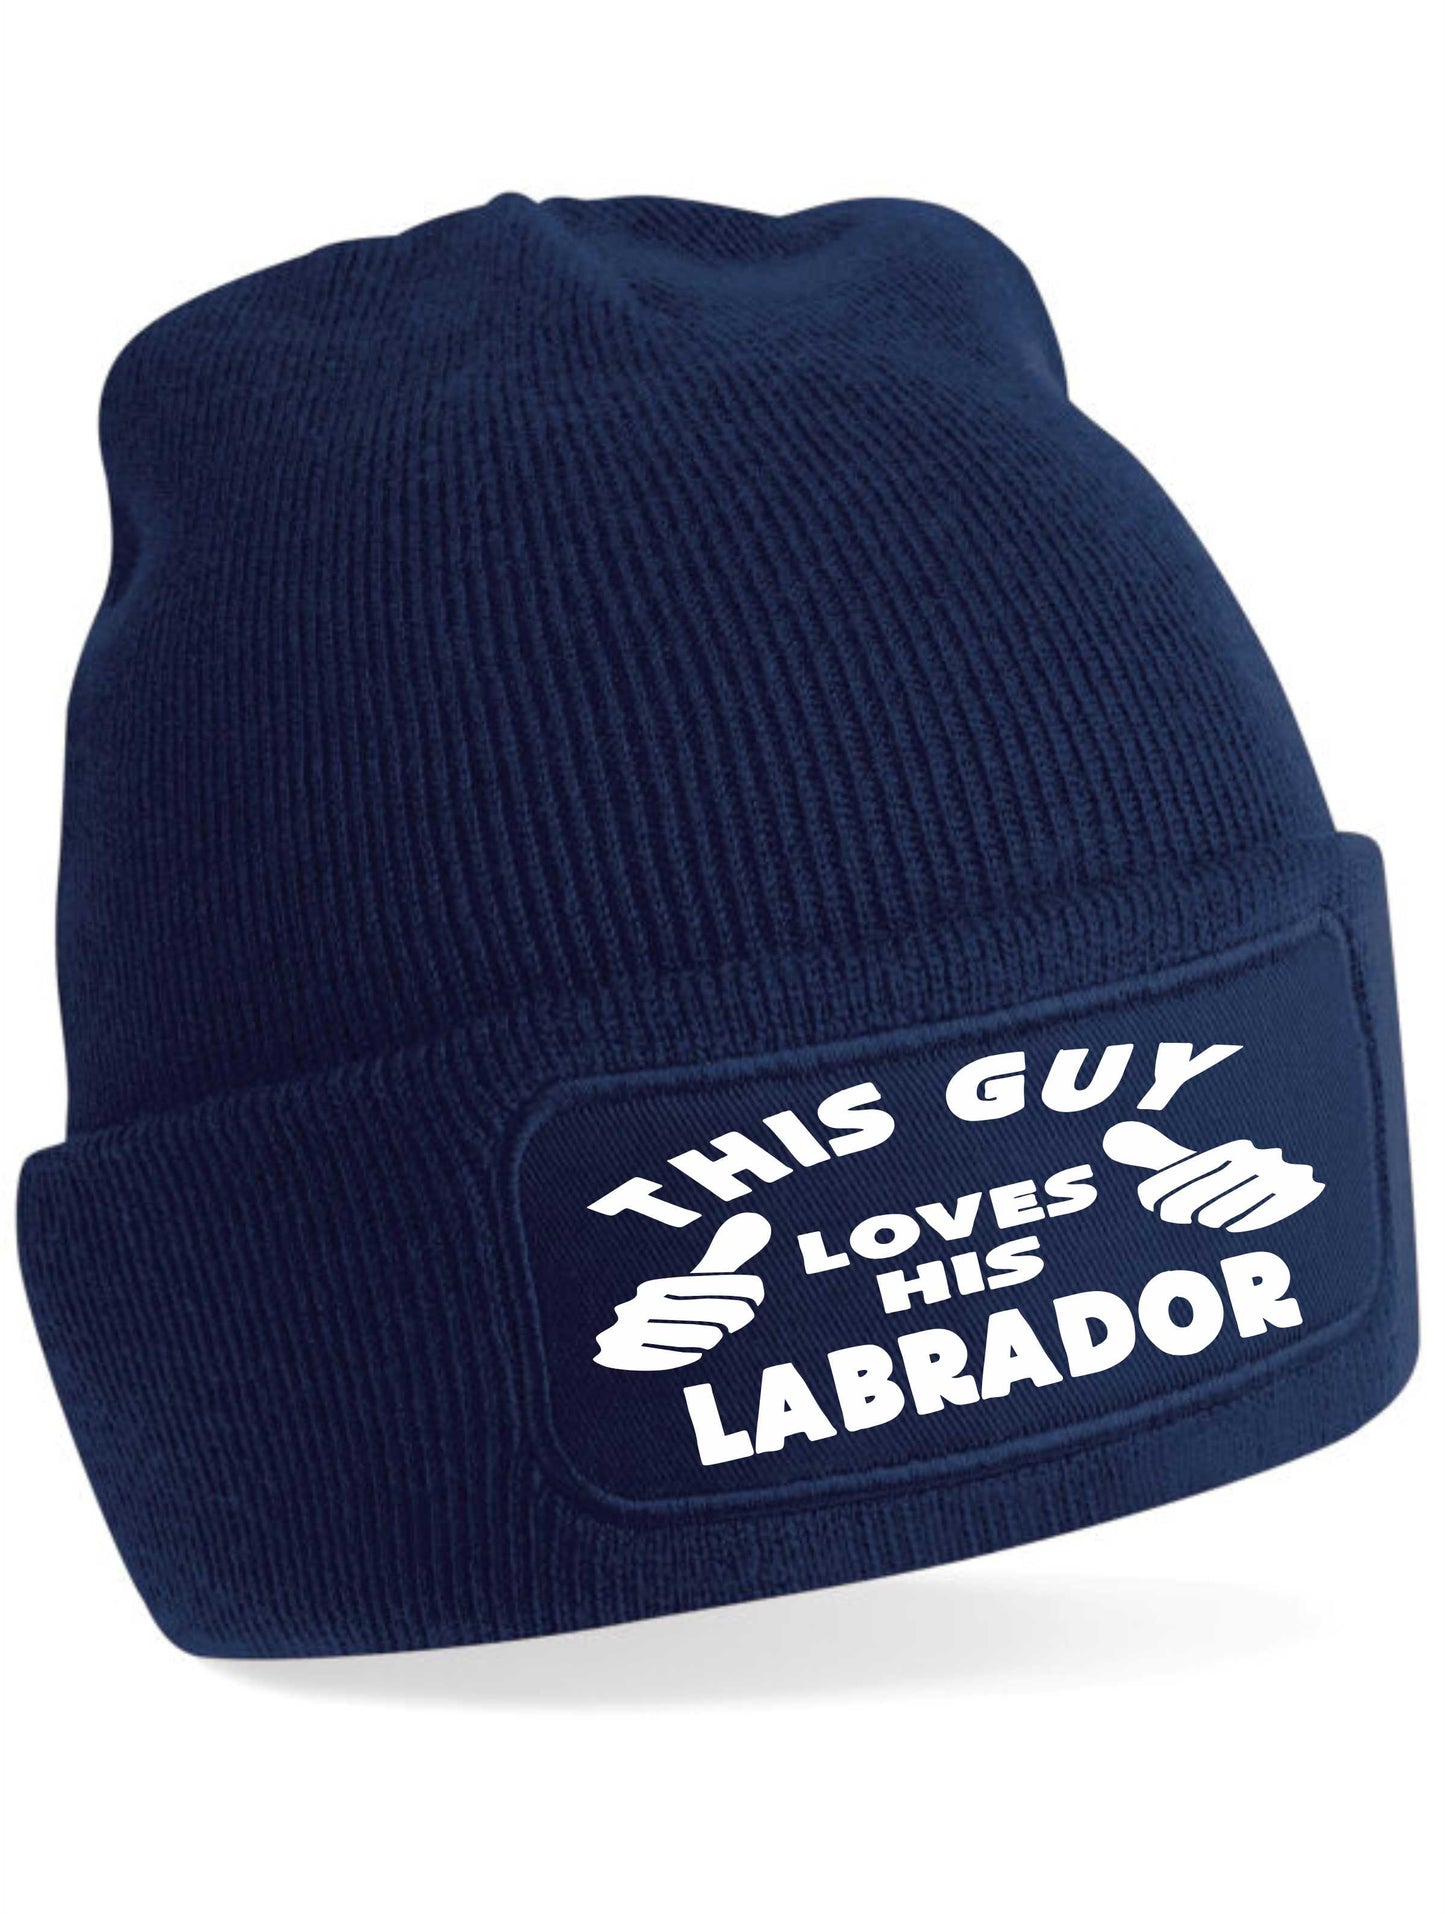 This Guy Loves His Labrador Beanie Hat Funny Dog Lovers Gift For Men